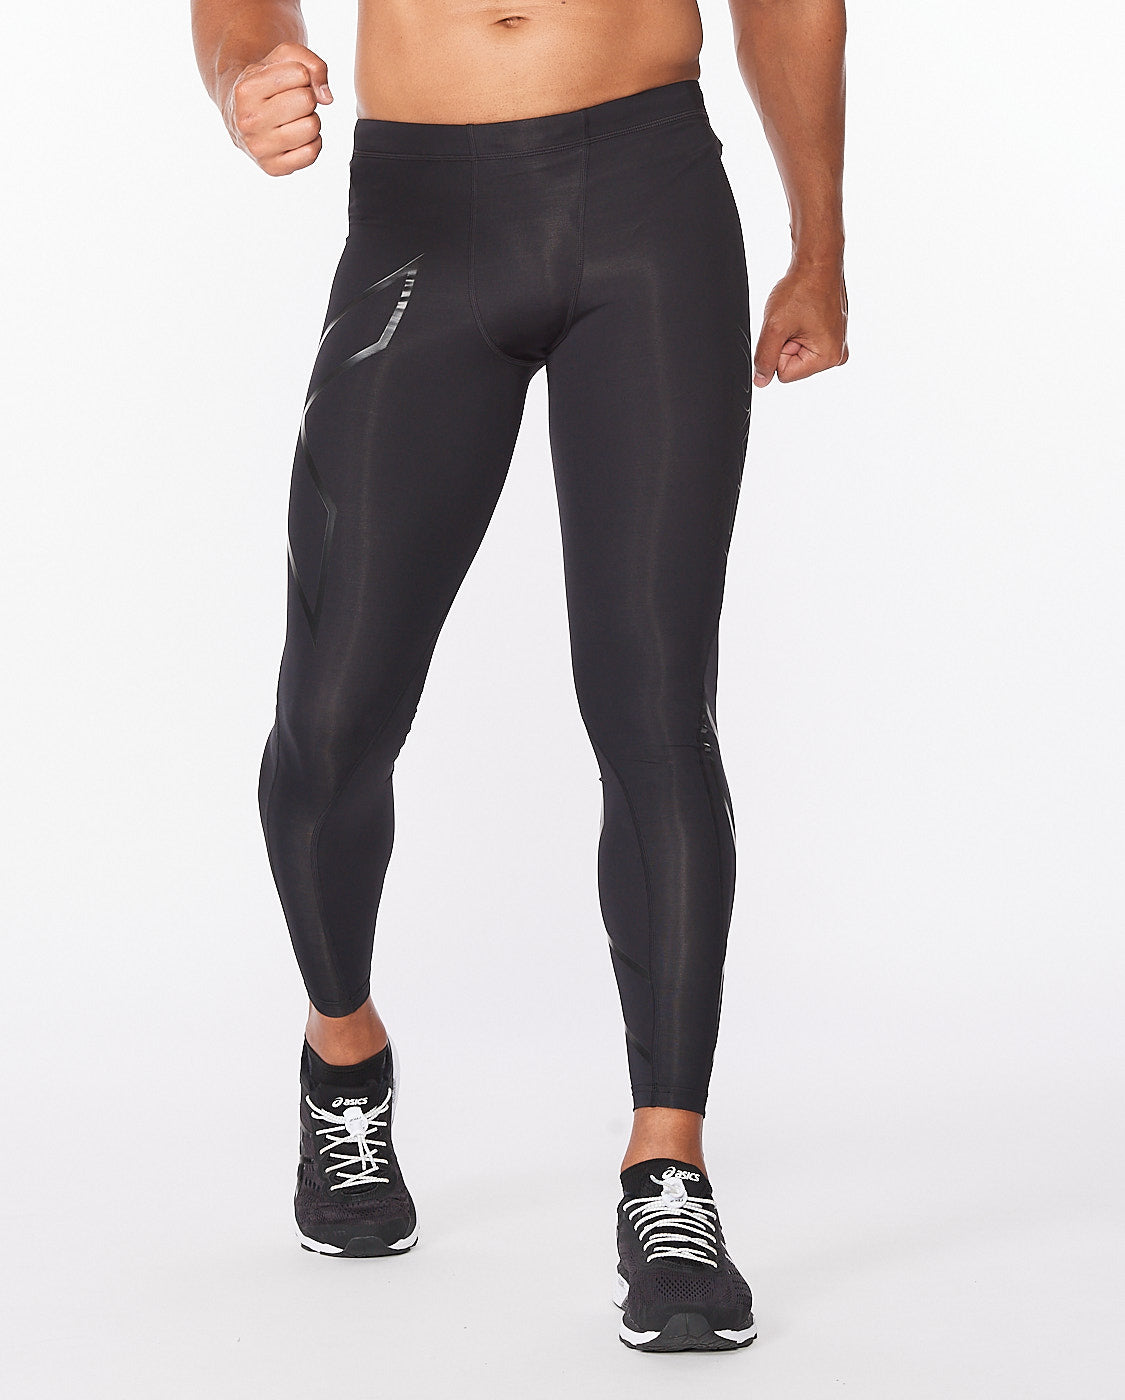 Ultimate Performance: Men's Compression Tights - Comfort